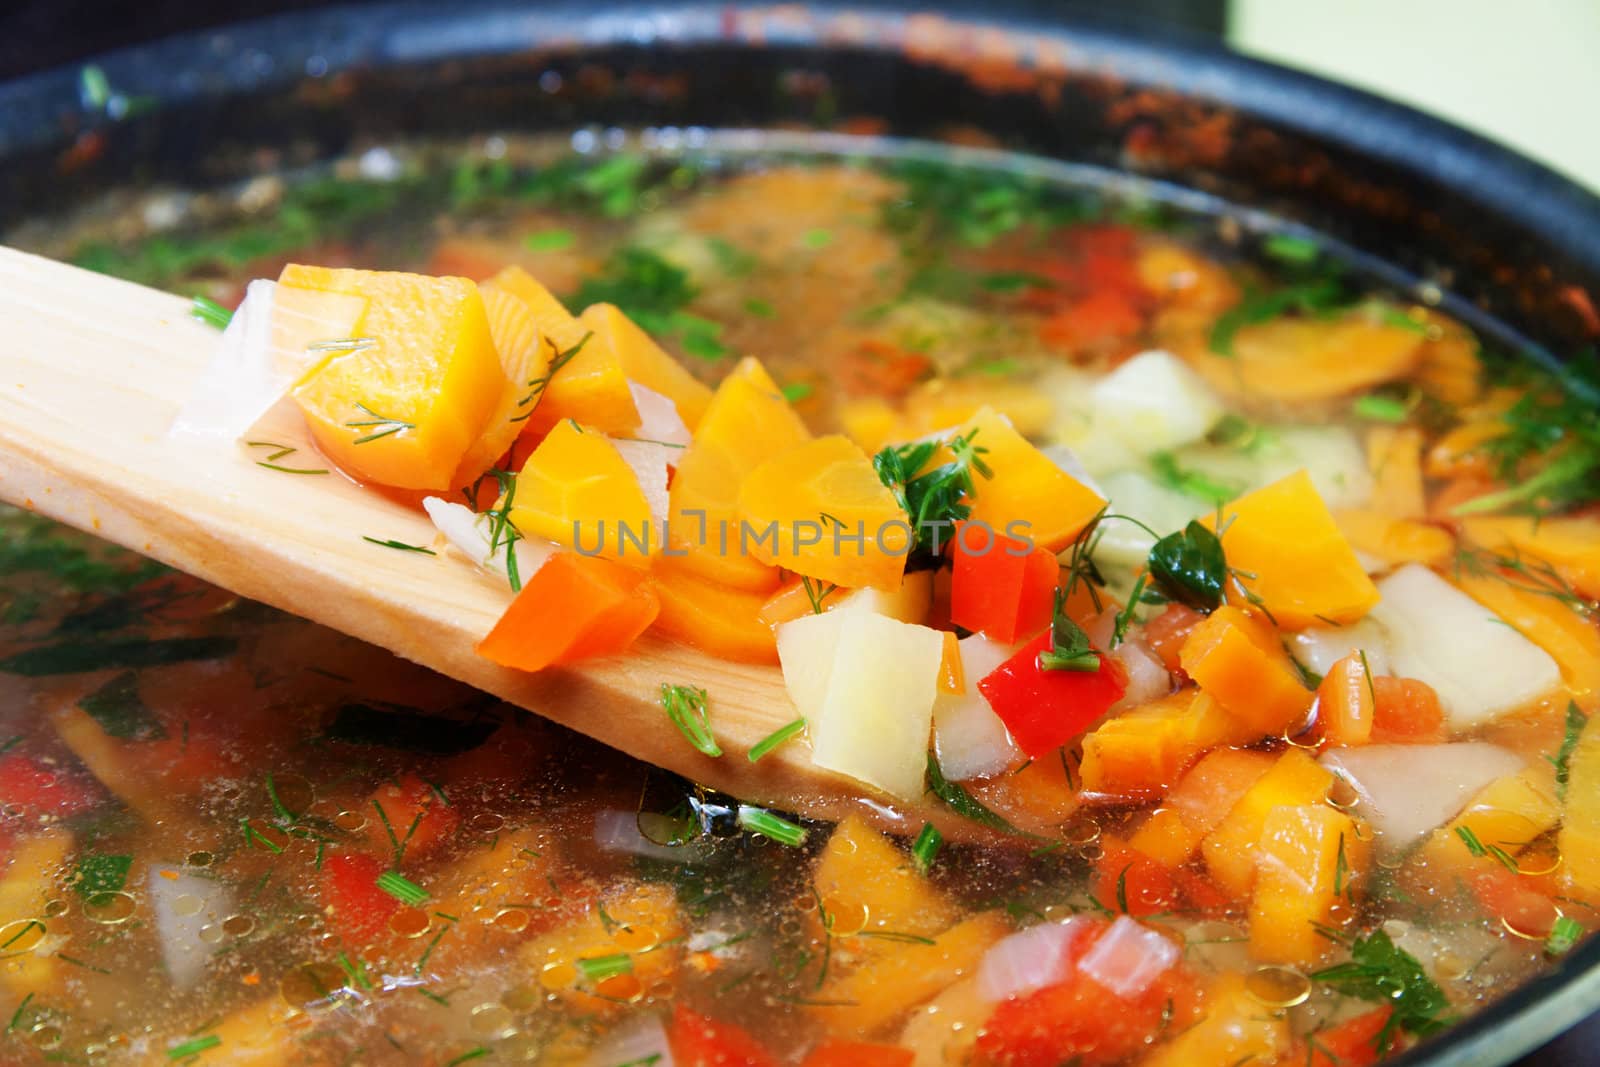 Vegetable soup with carrots, paprika, potatoes, onions and parsley with a wooden spoon